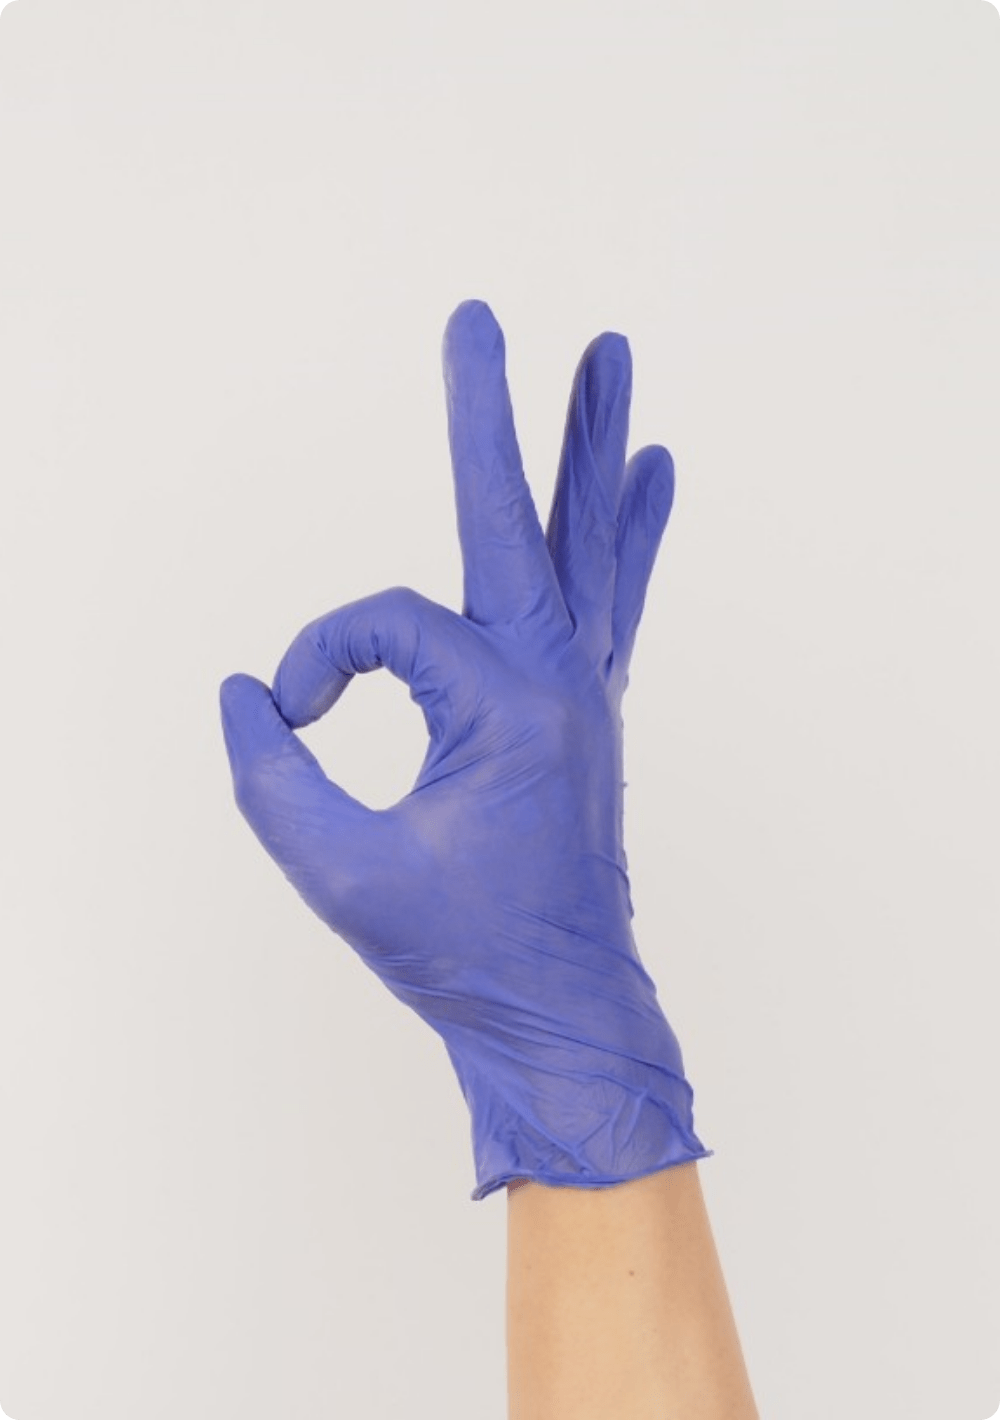 INTCO Medical Diamond Textured Nitrile Gloves: The first choice for industrial labor protection.